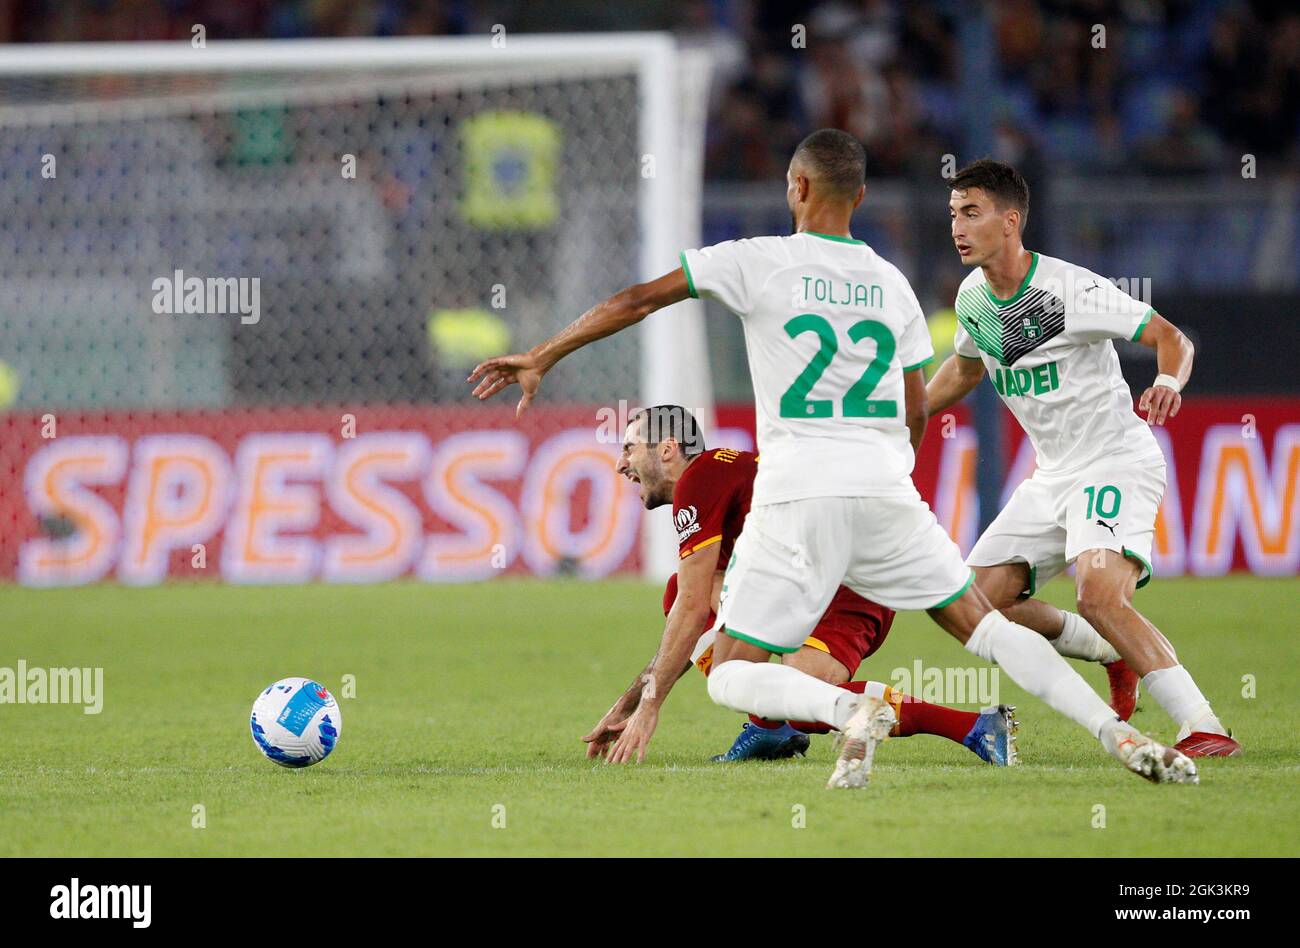 Rome, Italy. 12th Sep, 2021. Henrikh Mkhitaryan, of AS Roma, left, is challenged by Jeremy Toljan, center, and Filip Djuricic, of Sassuolo, during the Serie A soccer match between Roma and Sassuolo at the Olympic Stadium. Roma won 2-1. Credit: Stefano Massimo/Alamy Live News Stock Photo